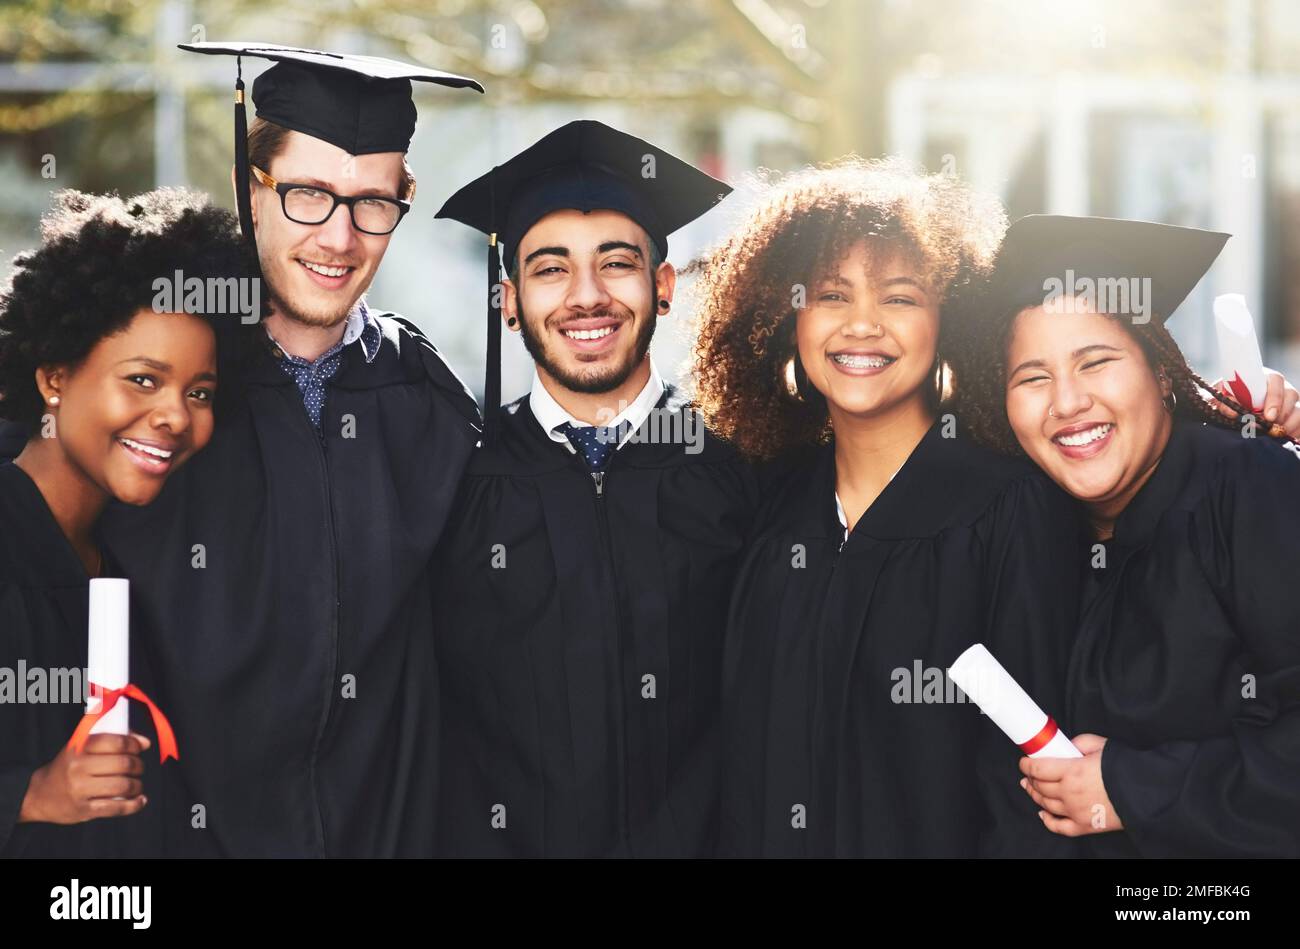 Our hard work paid off today. a group of students standing together on graduation day. Stock Photo